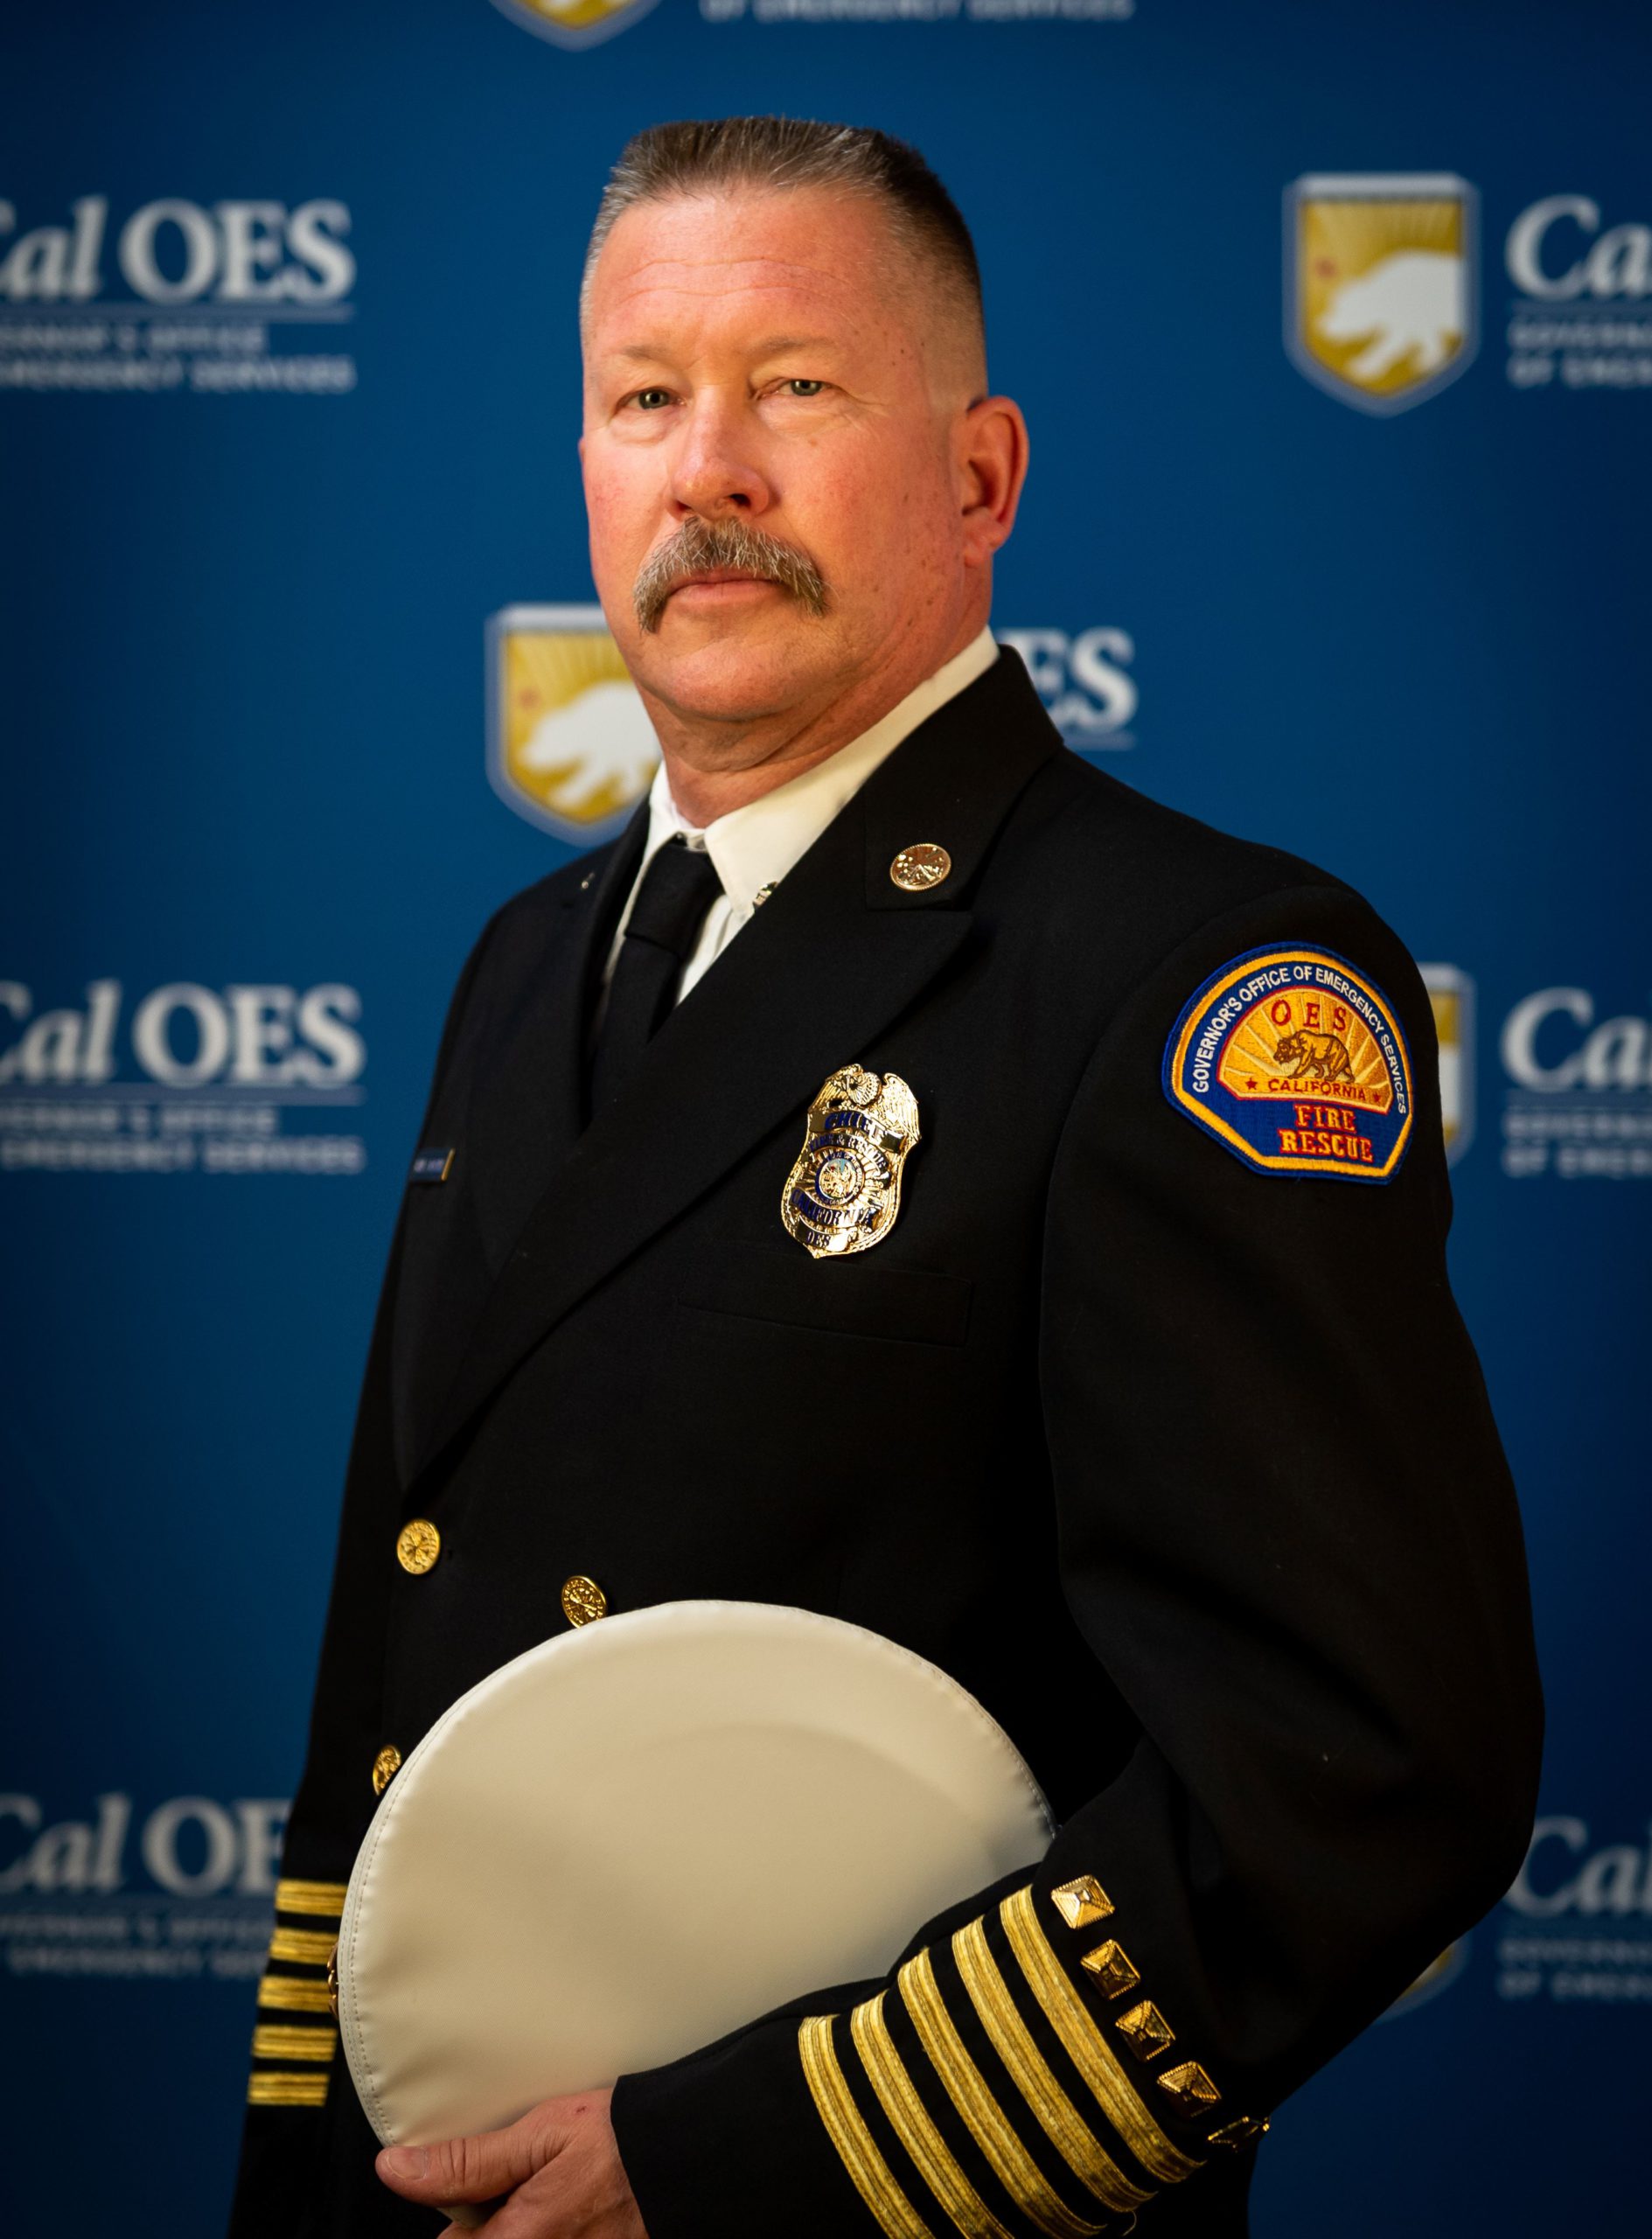 Cal OES Fire and rescue Chief Brian Marshall holding his hat. Posed in front of Cal OES background in full uniform.